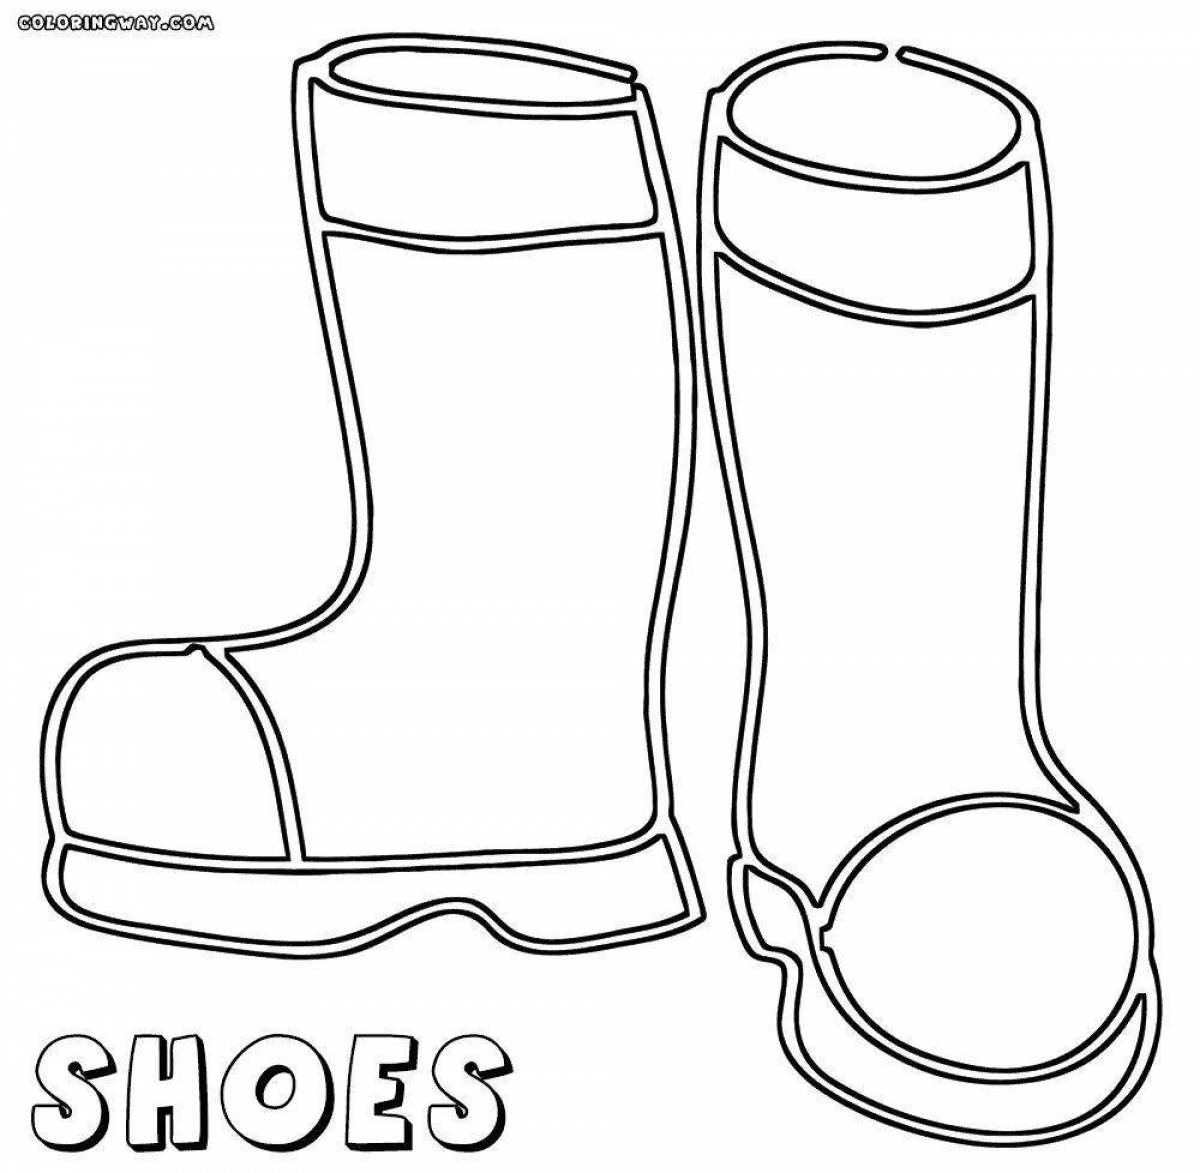 Adorable boots coloring book for kids